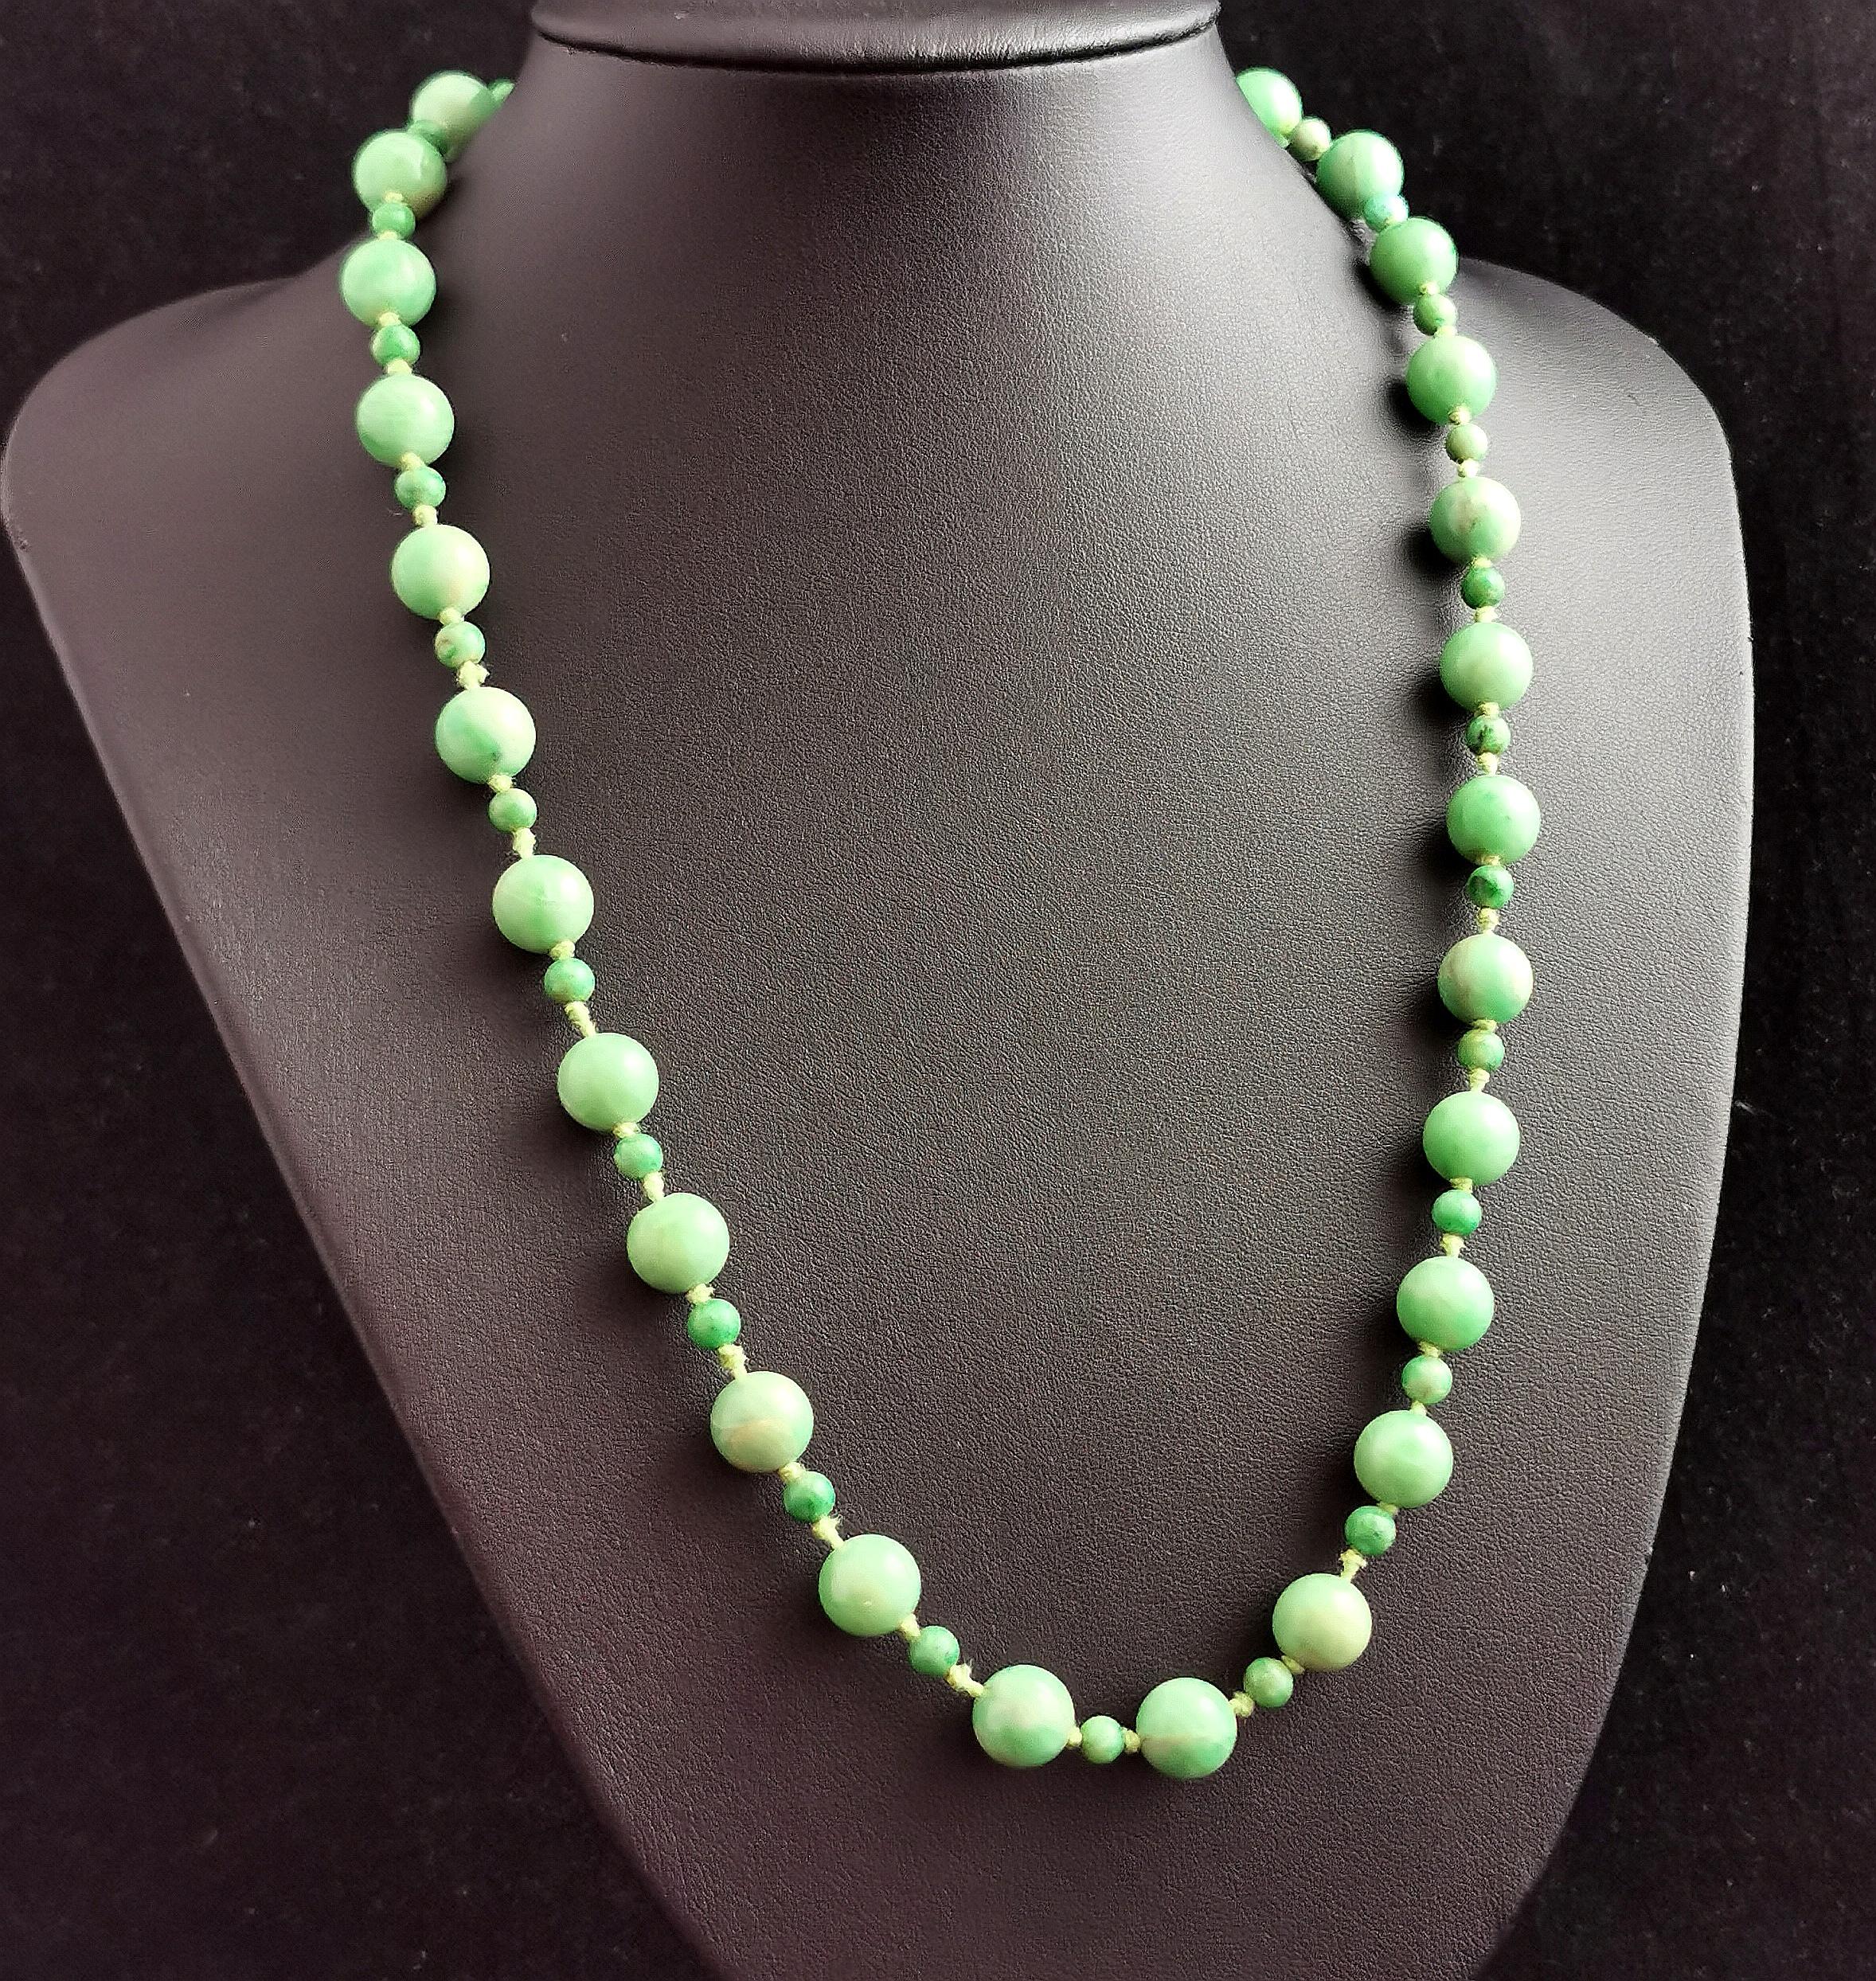 A beautiful antique Art Deco era Jadeite Jade bead necklace.

Lovely apple green beads, with beautiful variations in the colourway from almost white to darker green streaks, all delicately hand shaped and tightly knotted onto a cotton thread.

The